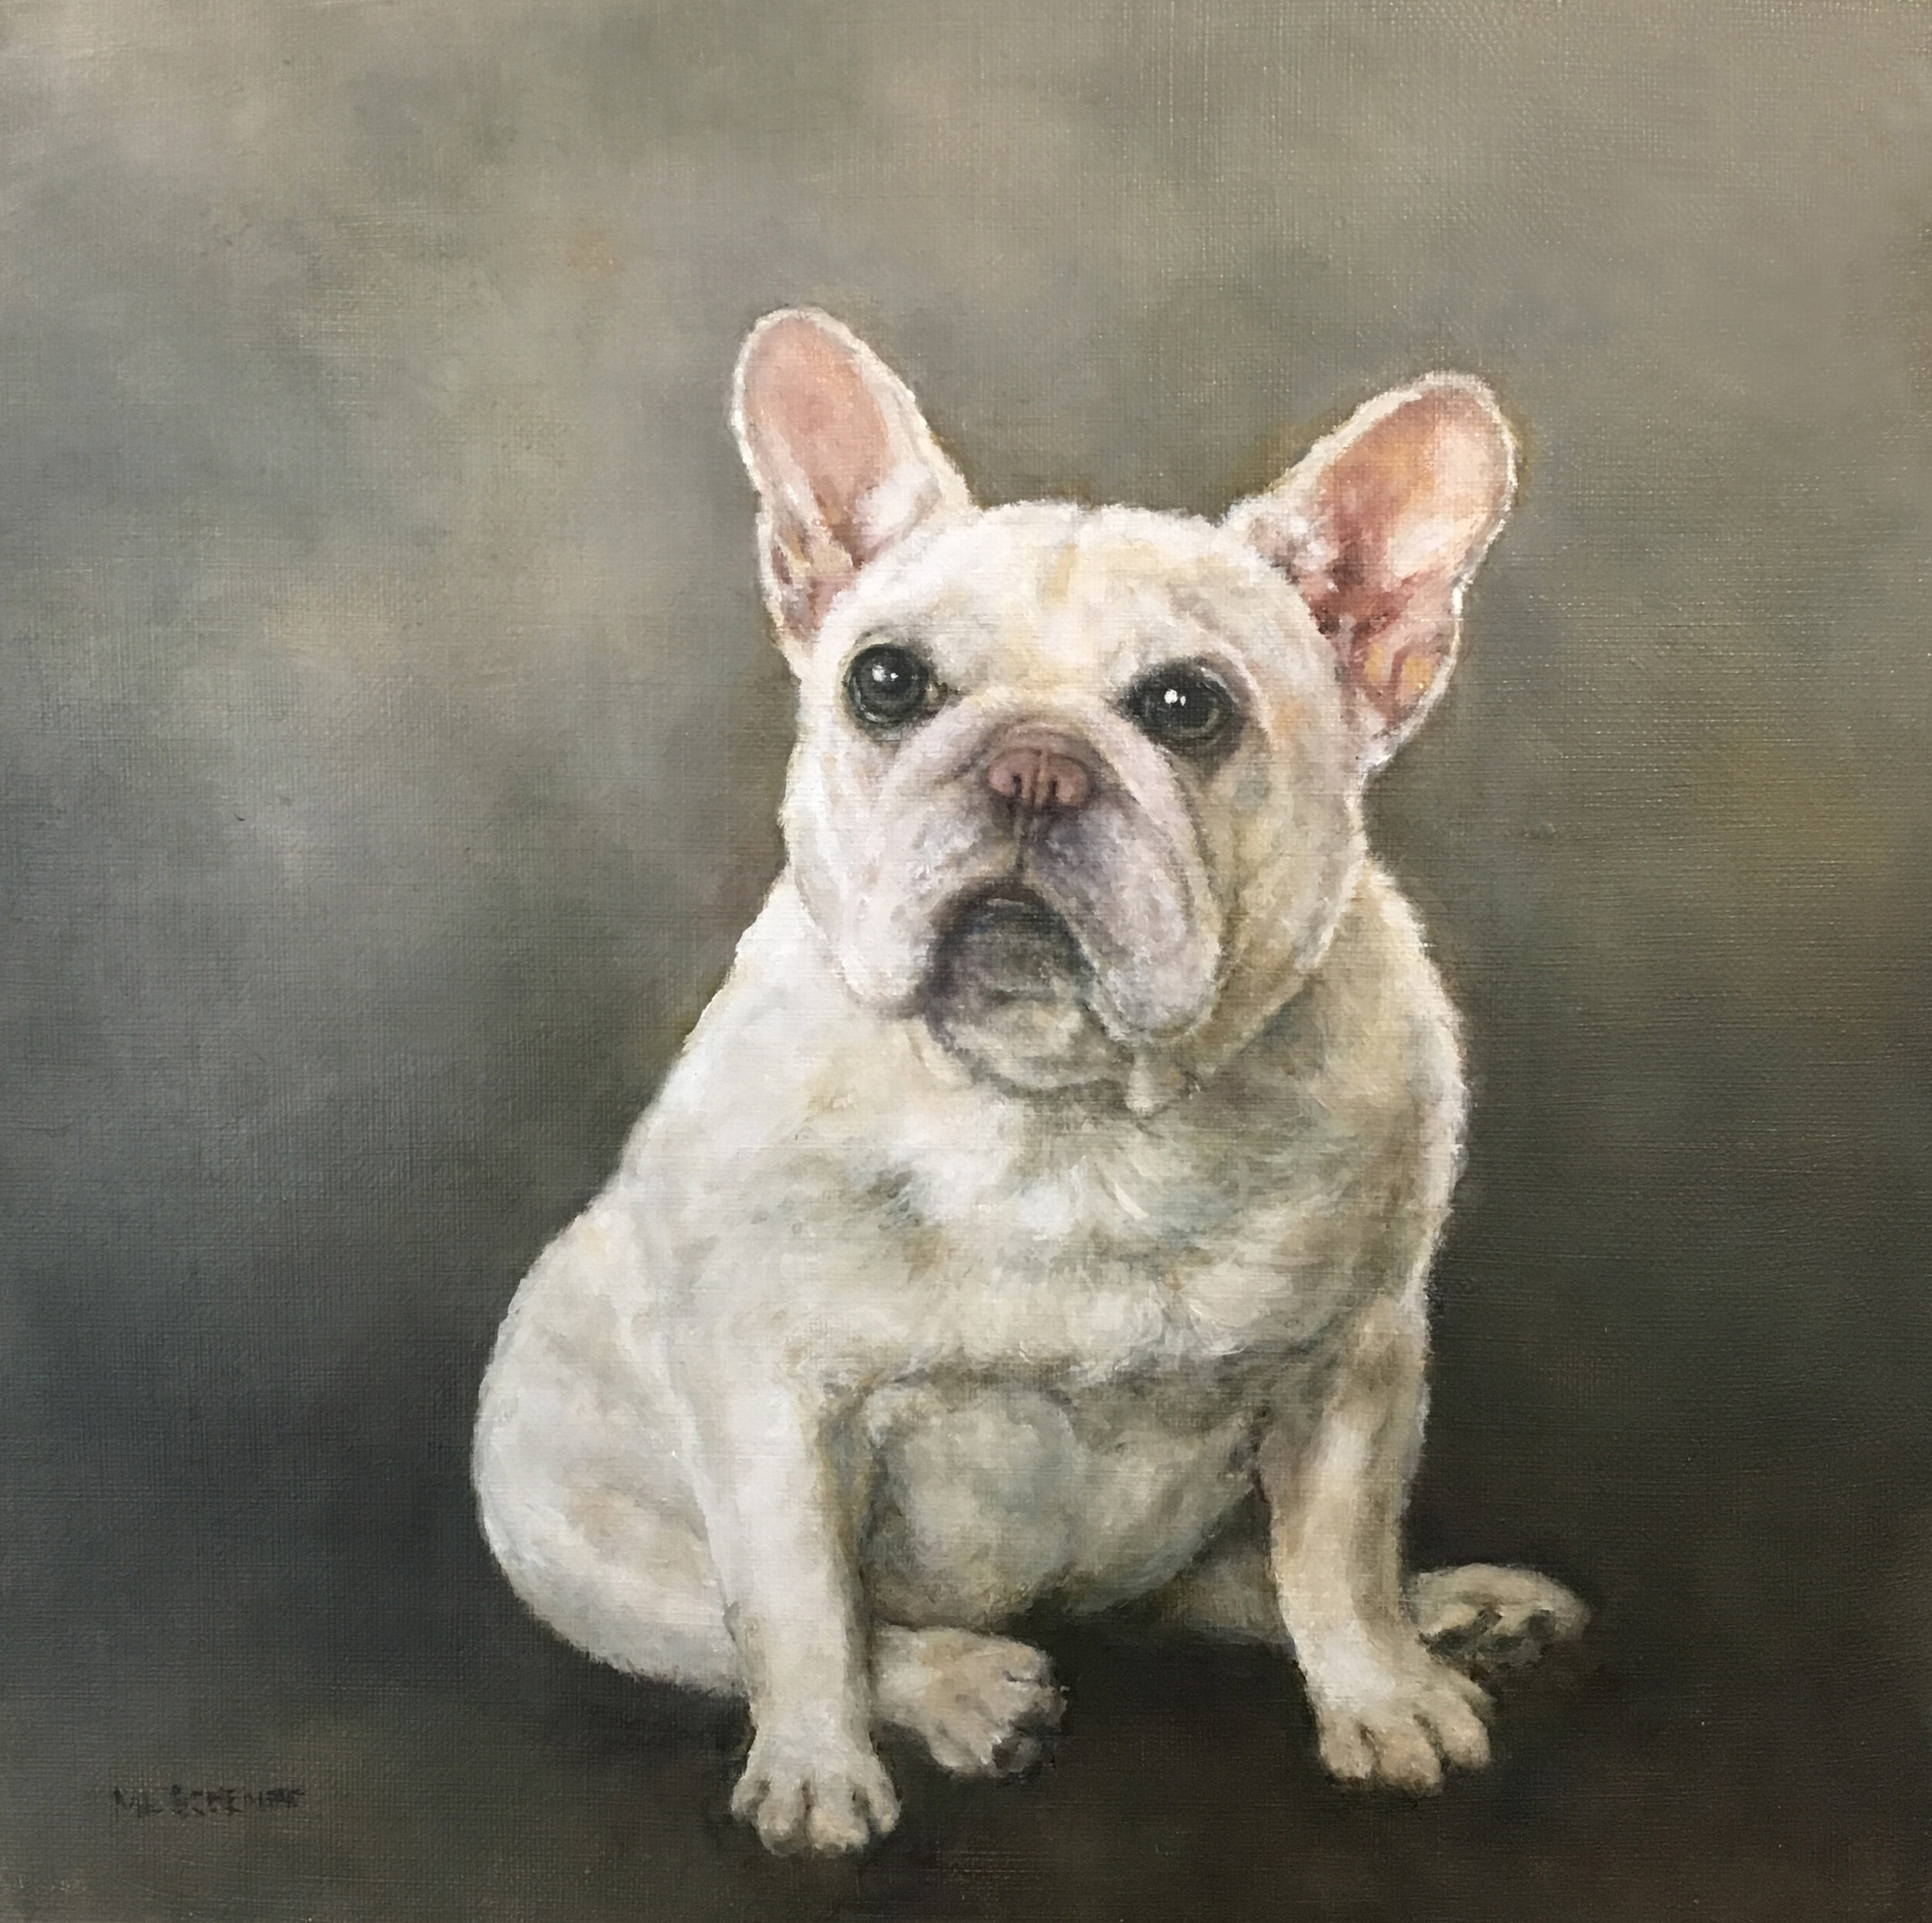  Mary Lou Schempf  Pinky,    12” x 12”, oil on linen  (available)  